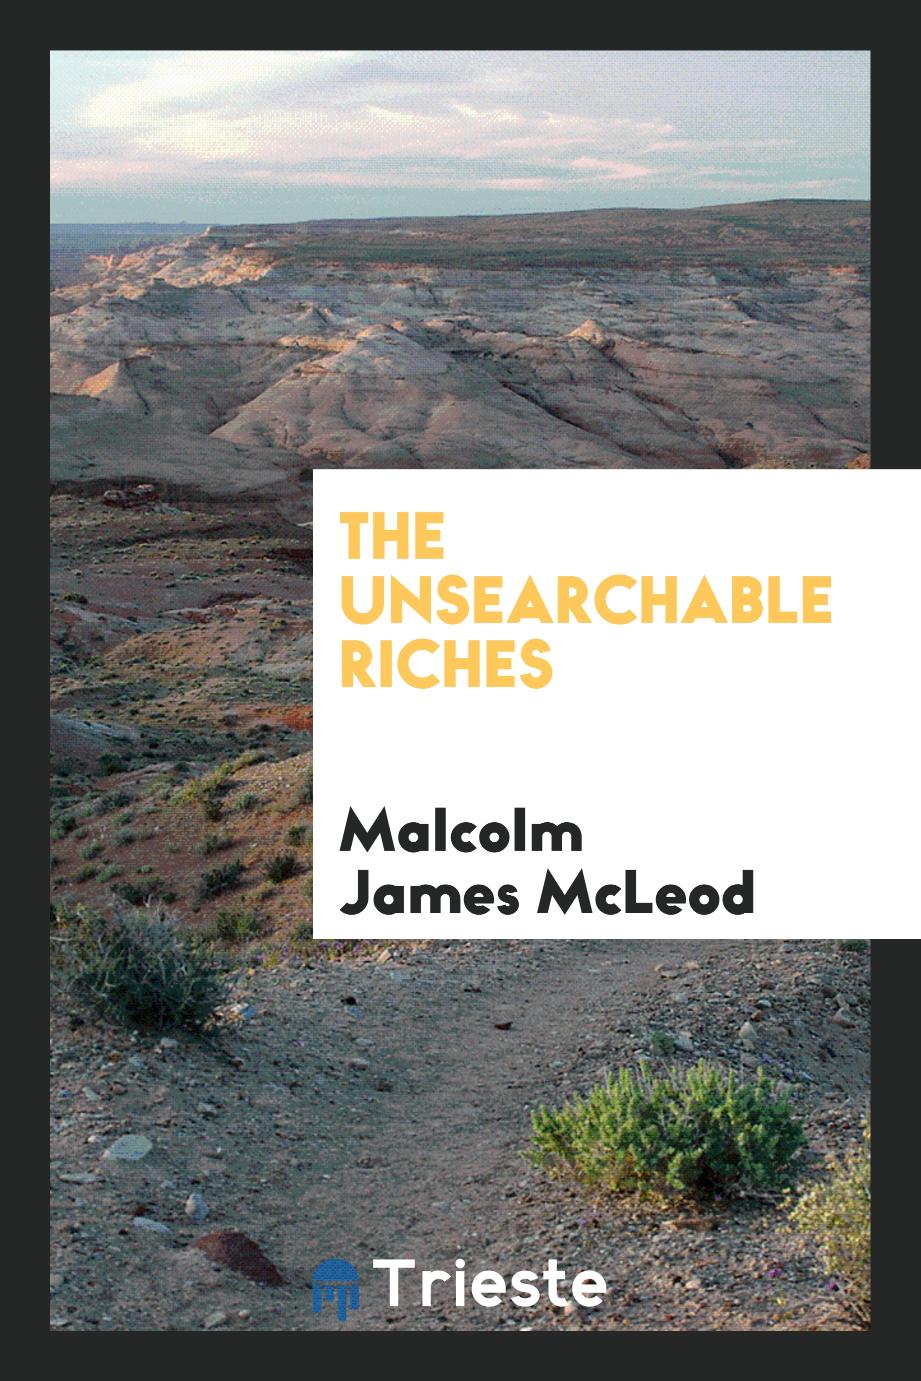 The unsearchable riches